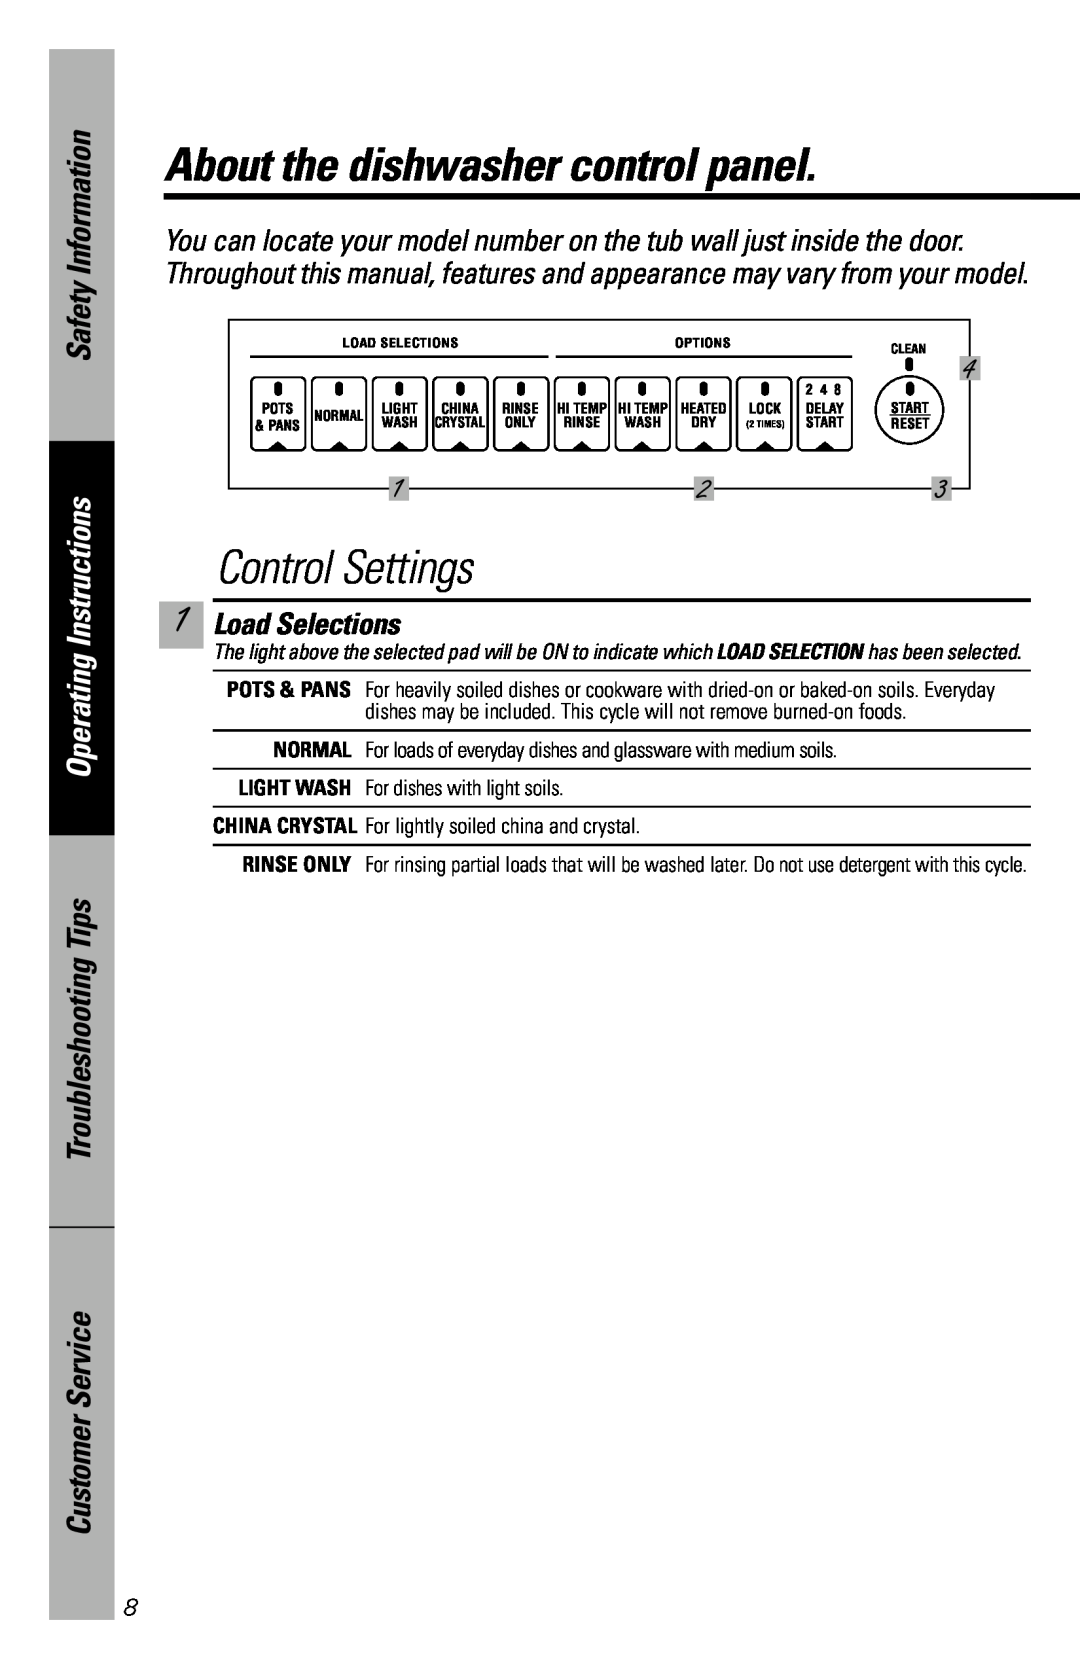 GE GSD5114, EDW2020 About the dishwasher control panel, Control Settings, Safety Information, Operating Instructions 